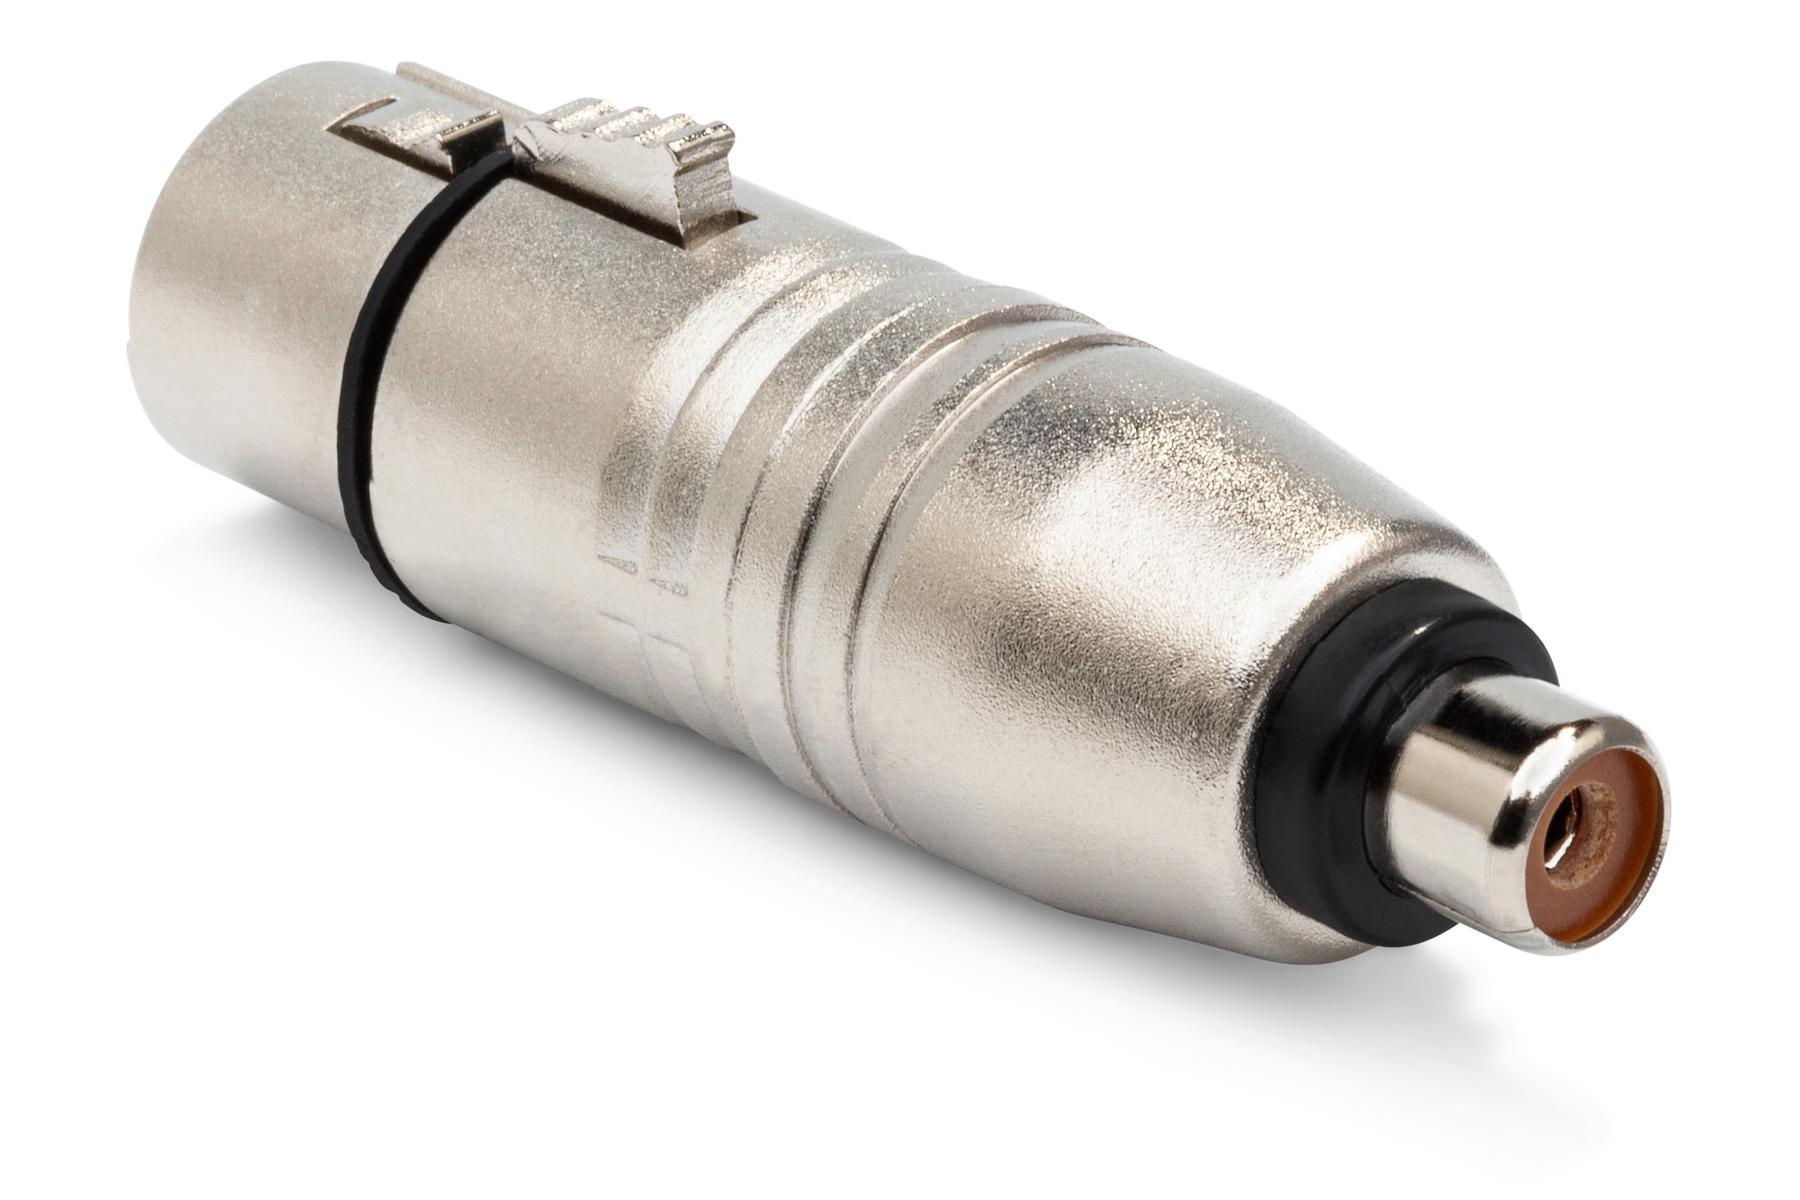 RCA to Male XLR Adapter